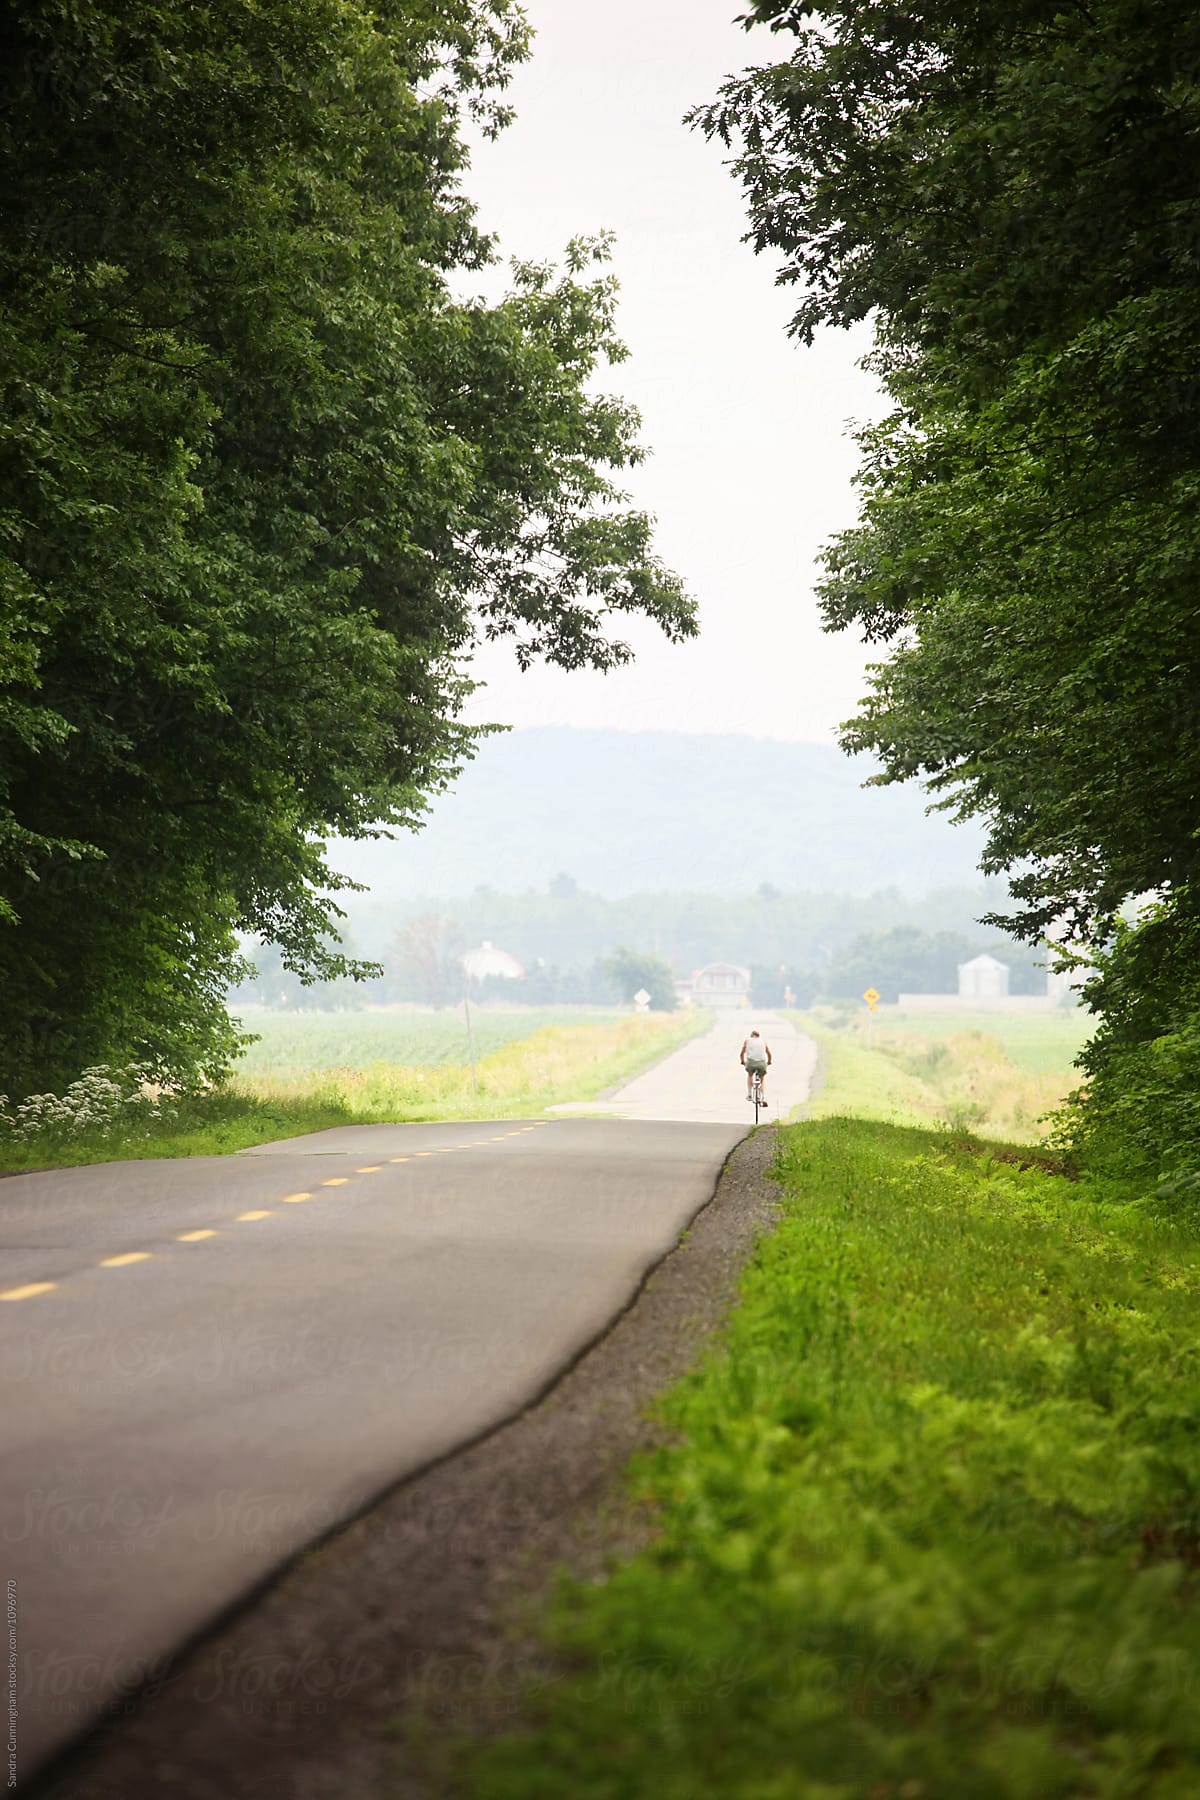 Rural country road with man cycling